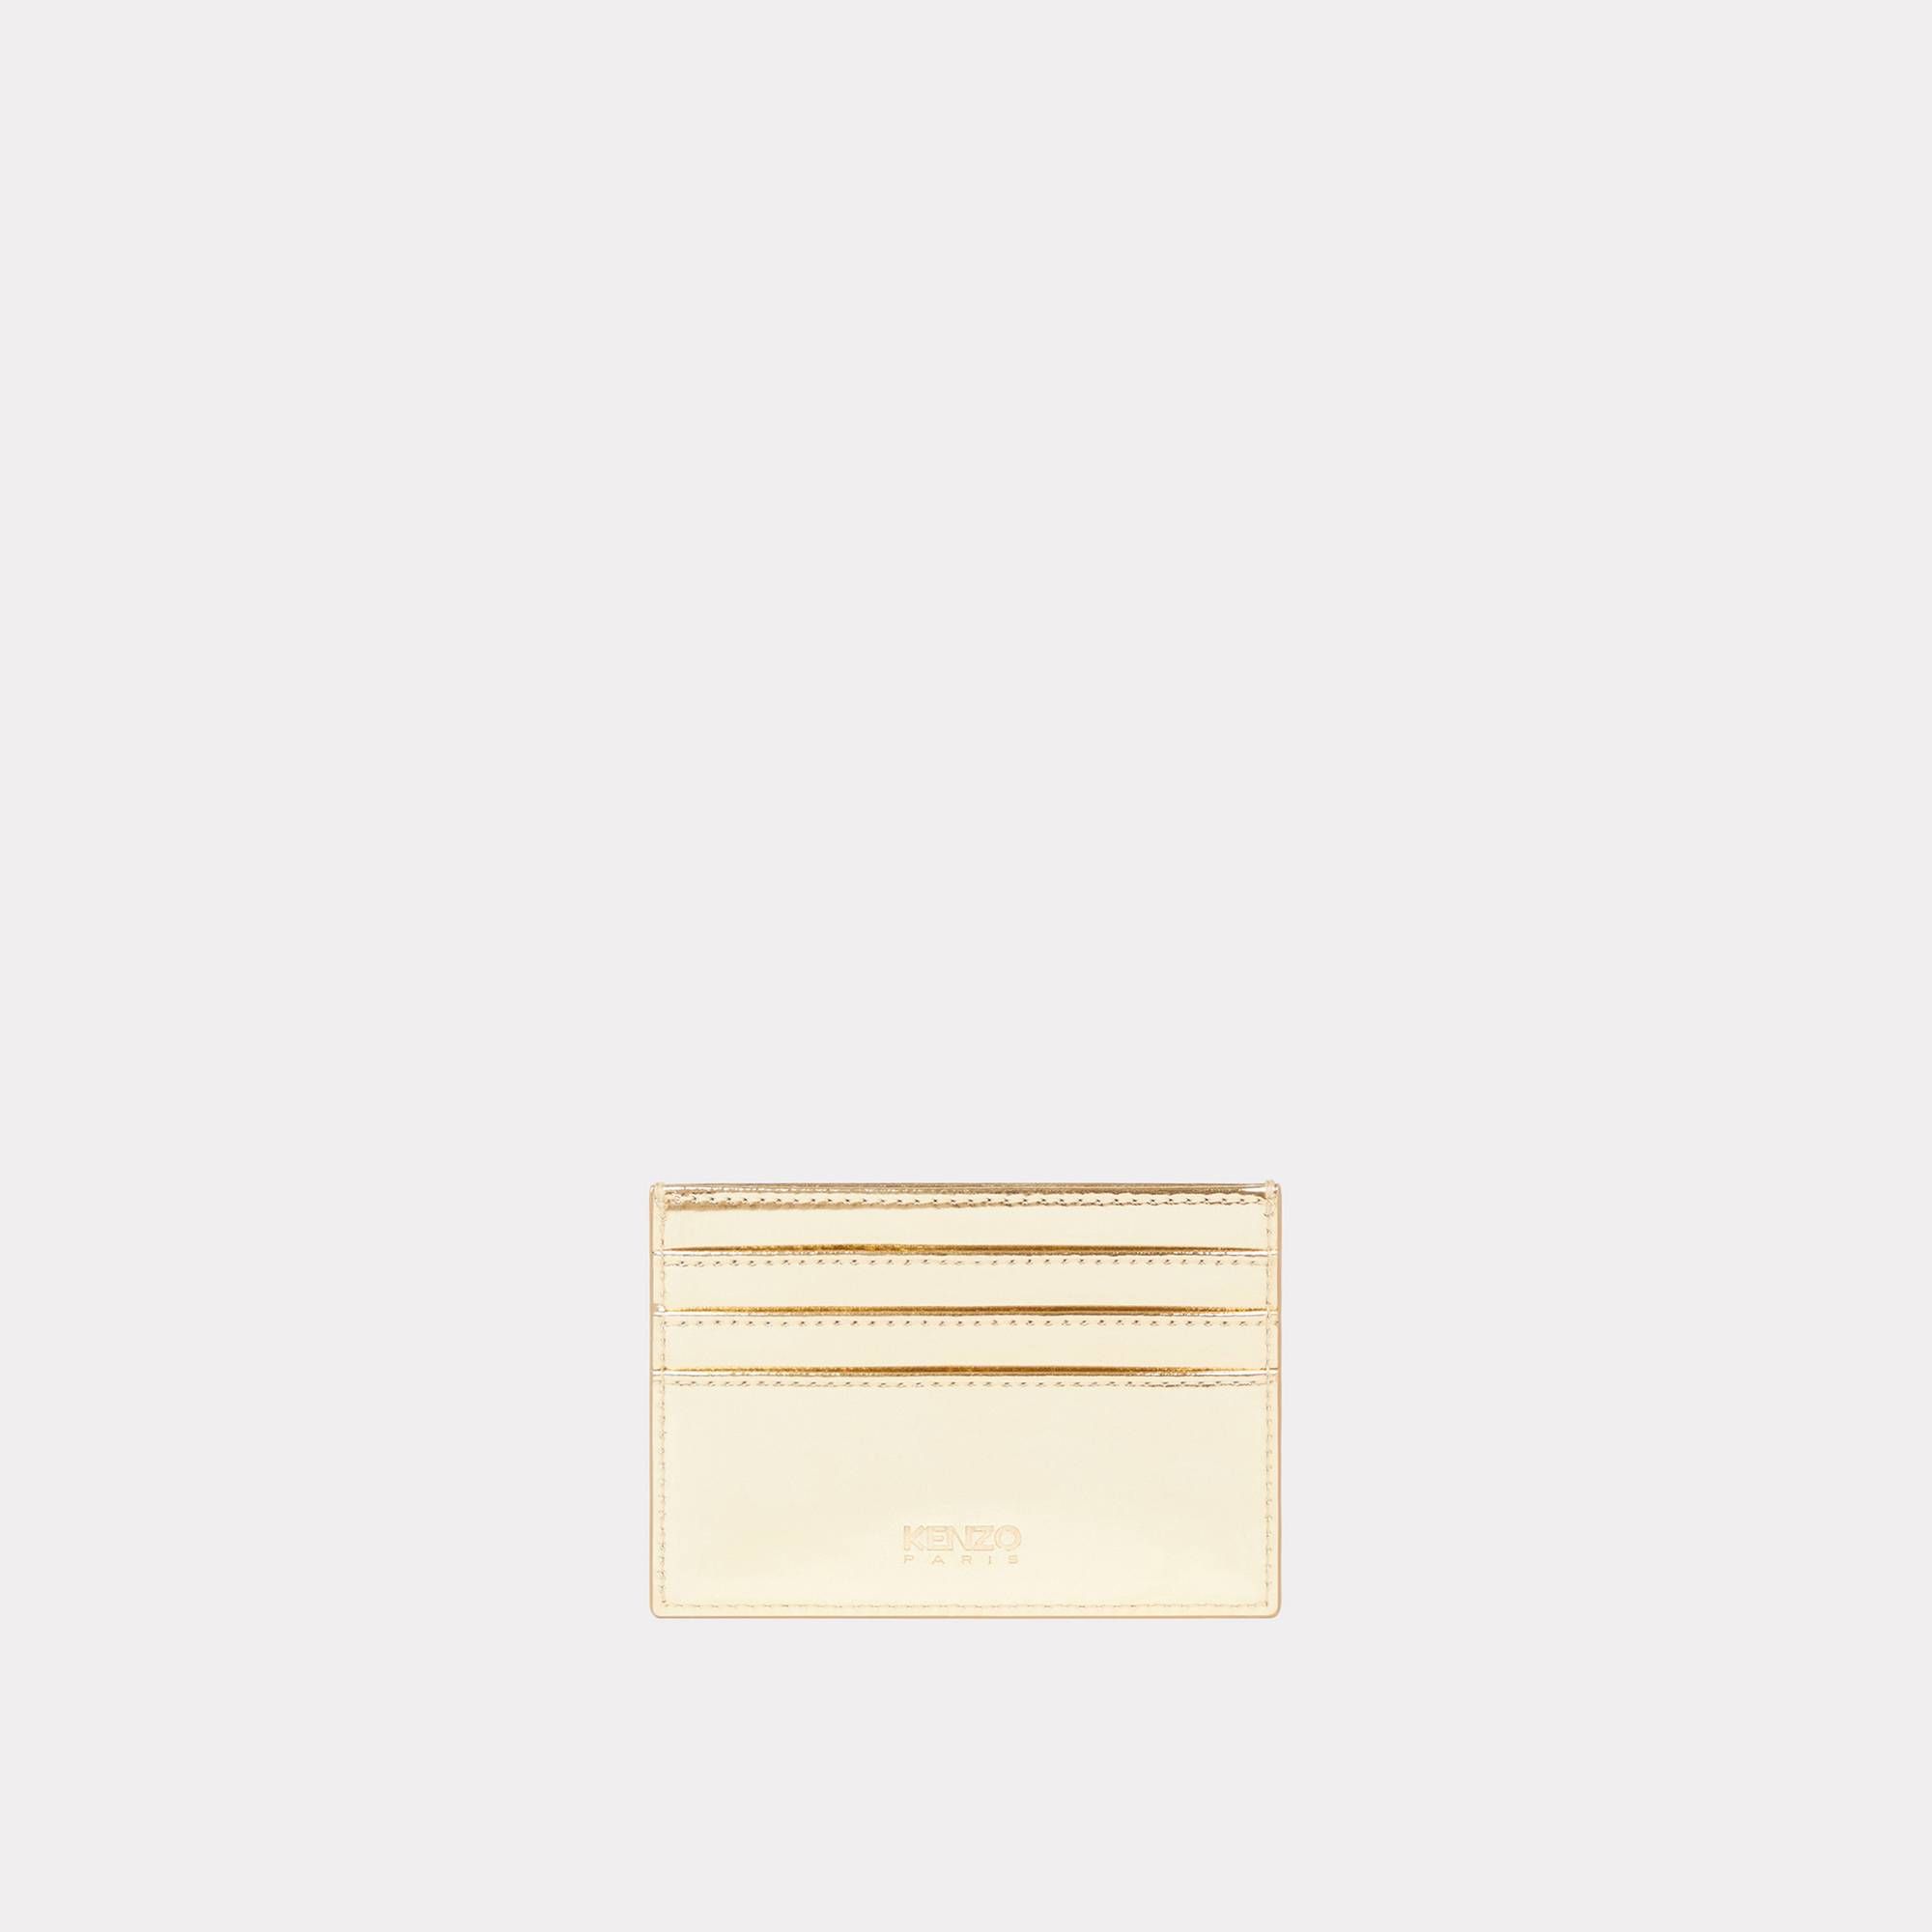  KENZO Paris Emboss Leather Card Holder - Gold 